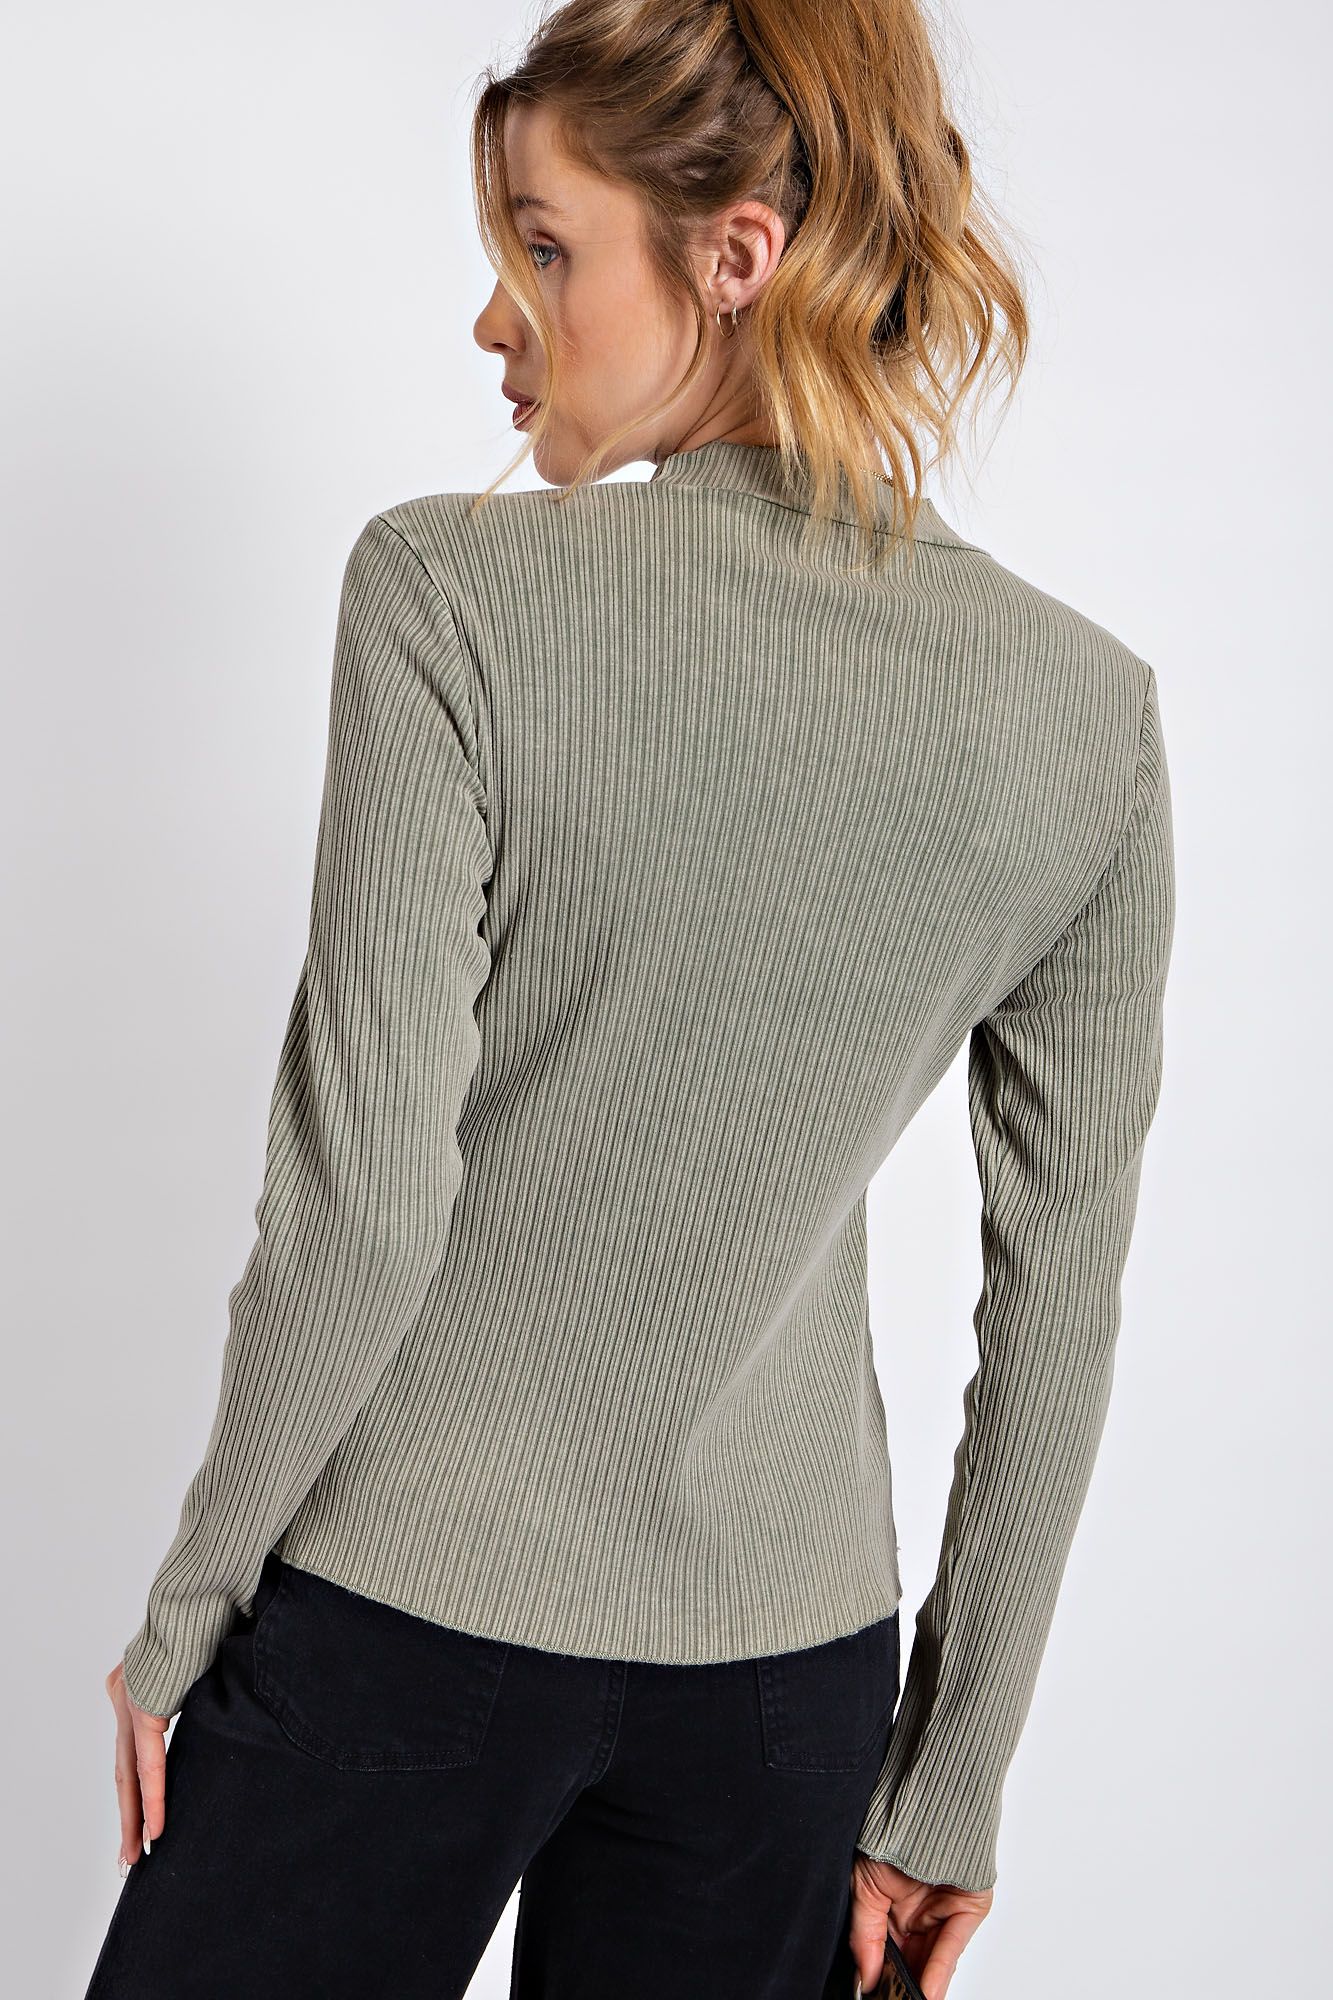 Easel Mineral Washed Rib Knit Mock Neck Lettuce Trim Edge Fitted Slim Top